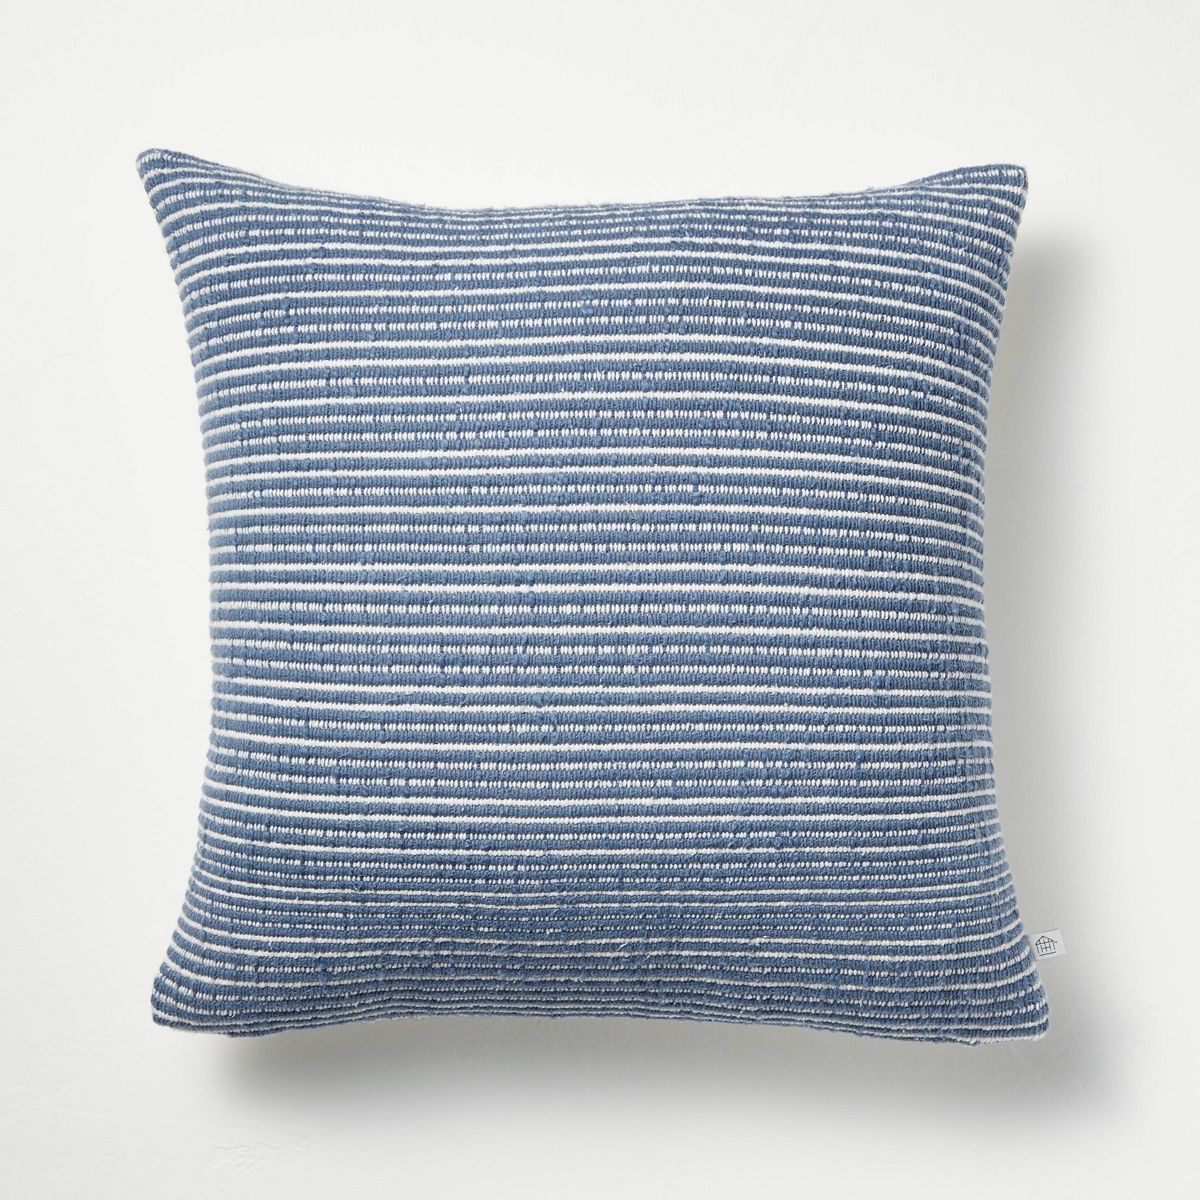 18"x18" Textured Narrow Stripes Square Throw Pillow Blue/Cream - Hearth & Hand™ with Magnolia | Target